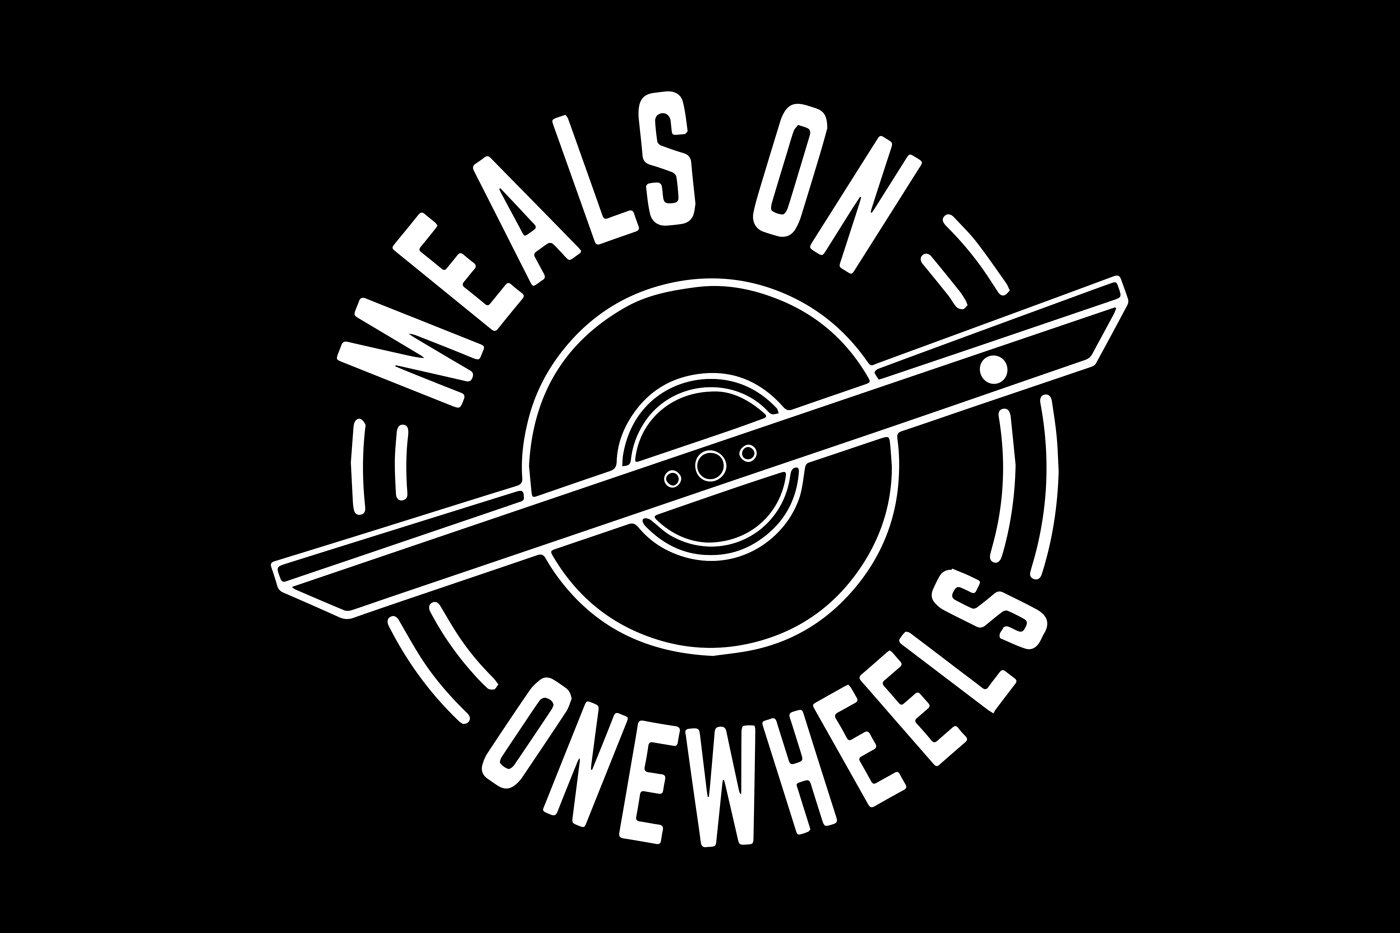 Meals On Onewheels